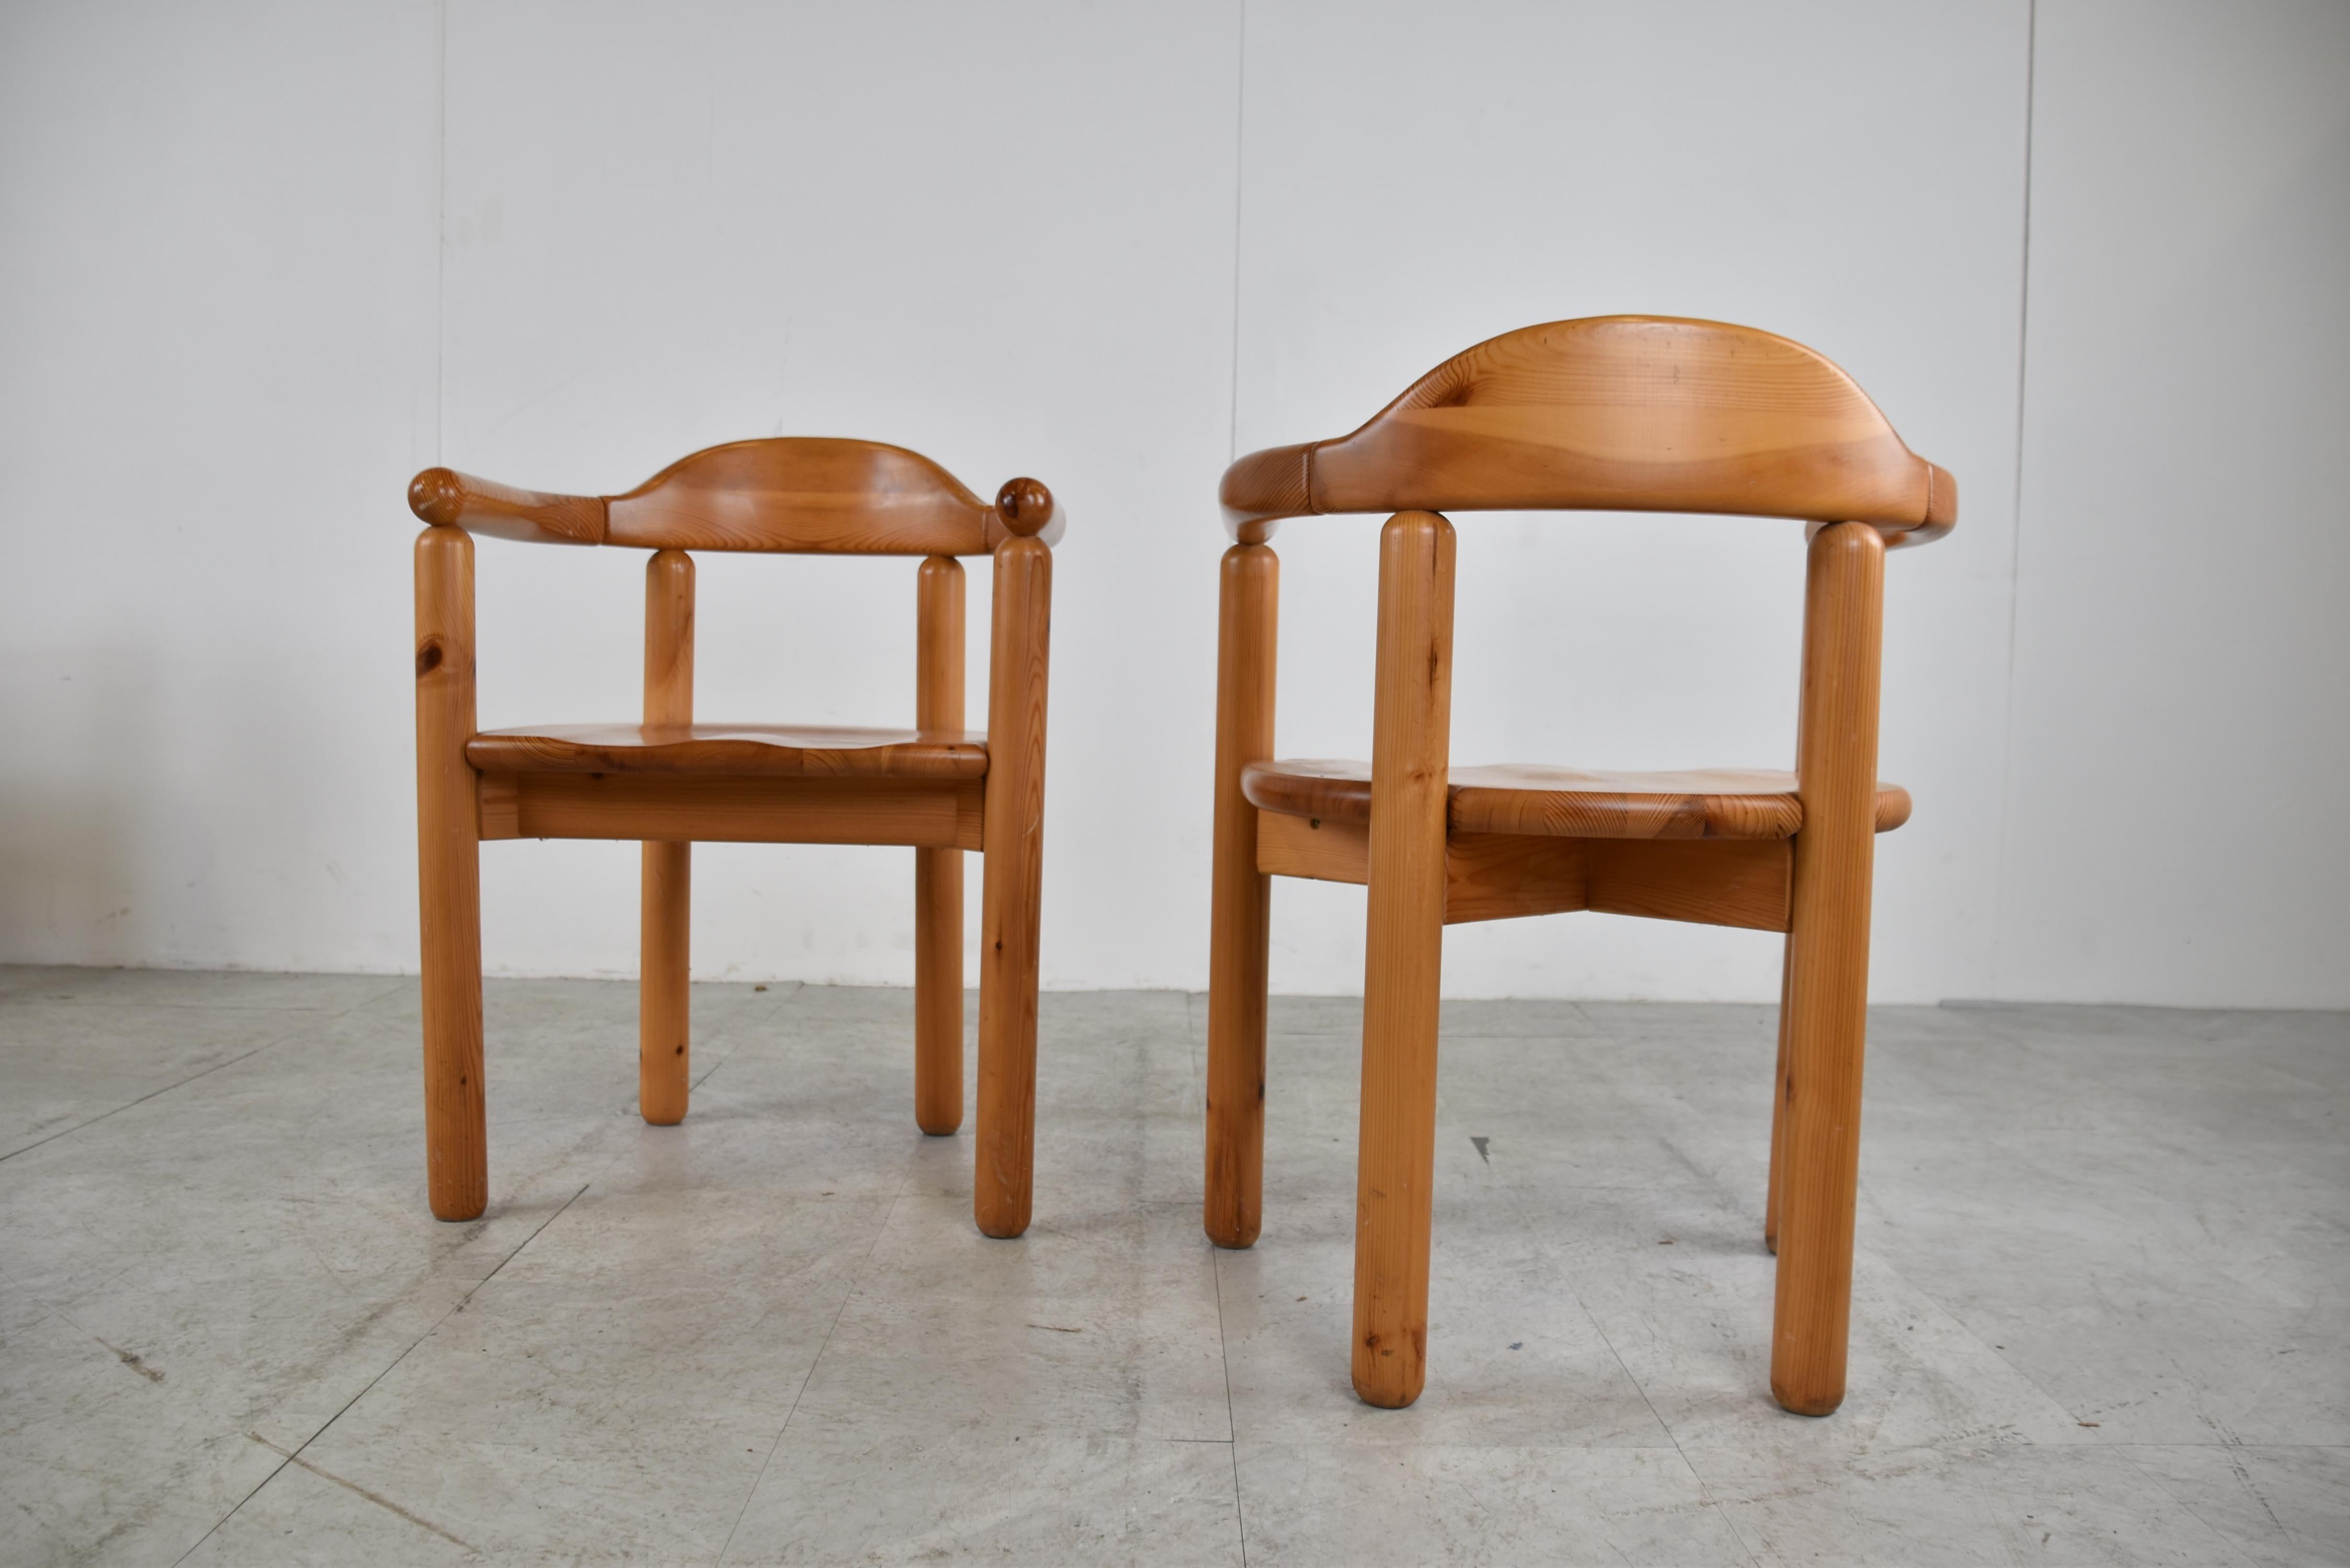 Pair of pine wood tripod dining chairs/armchairs.

Very much in the style of Rainer Daumiller chairs.

These chairs are well designed and look very elegant.

Good original condition.

Dimensions:
Height: 84cm/33.07